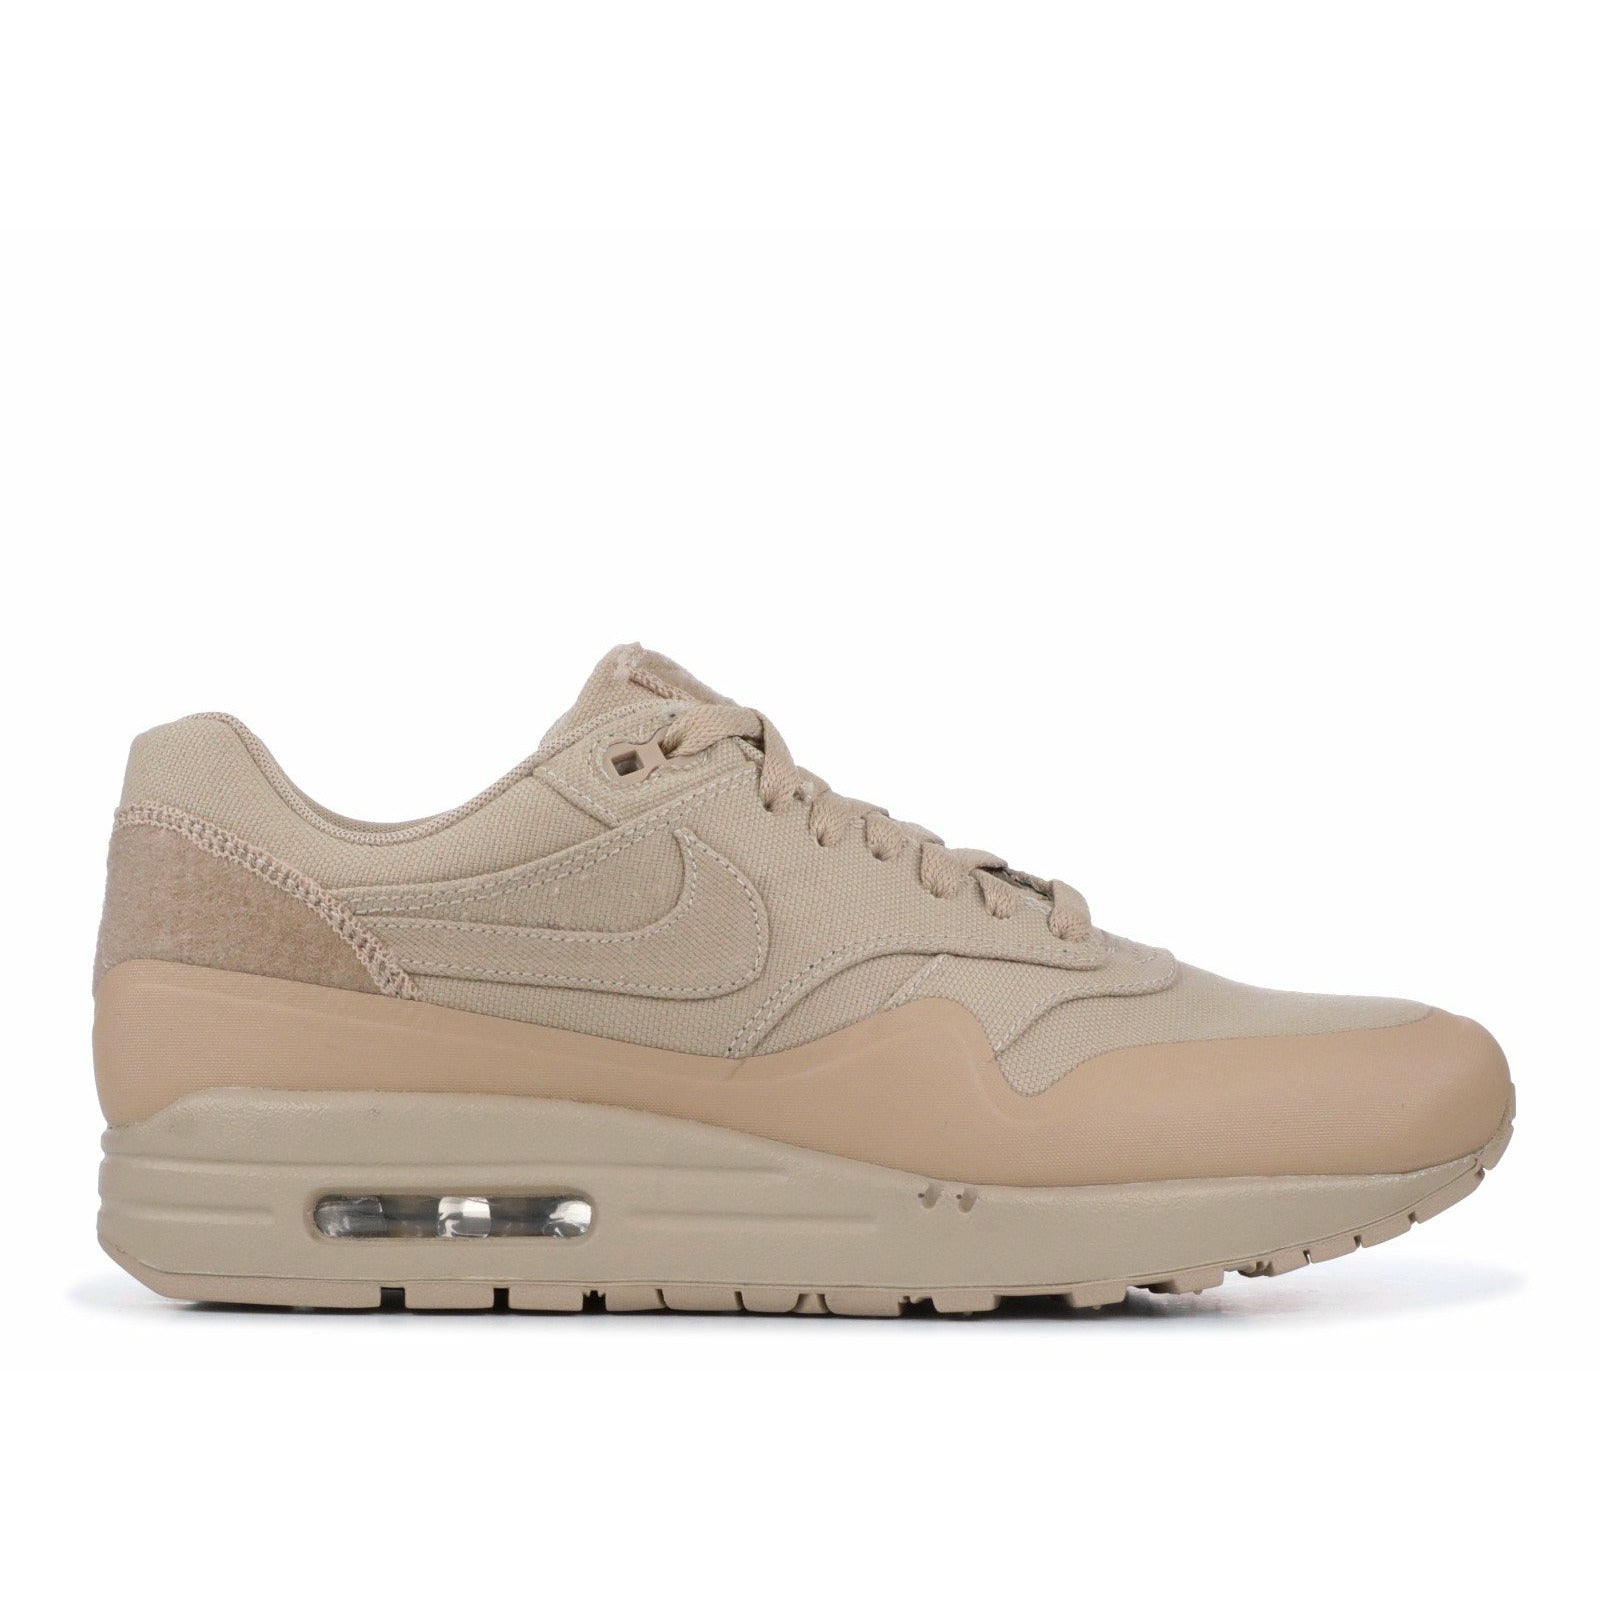 Nike-Air Max 1 V Sp "Patch Sand"-mrsneaker